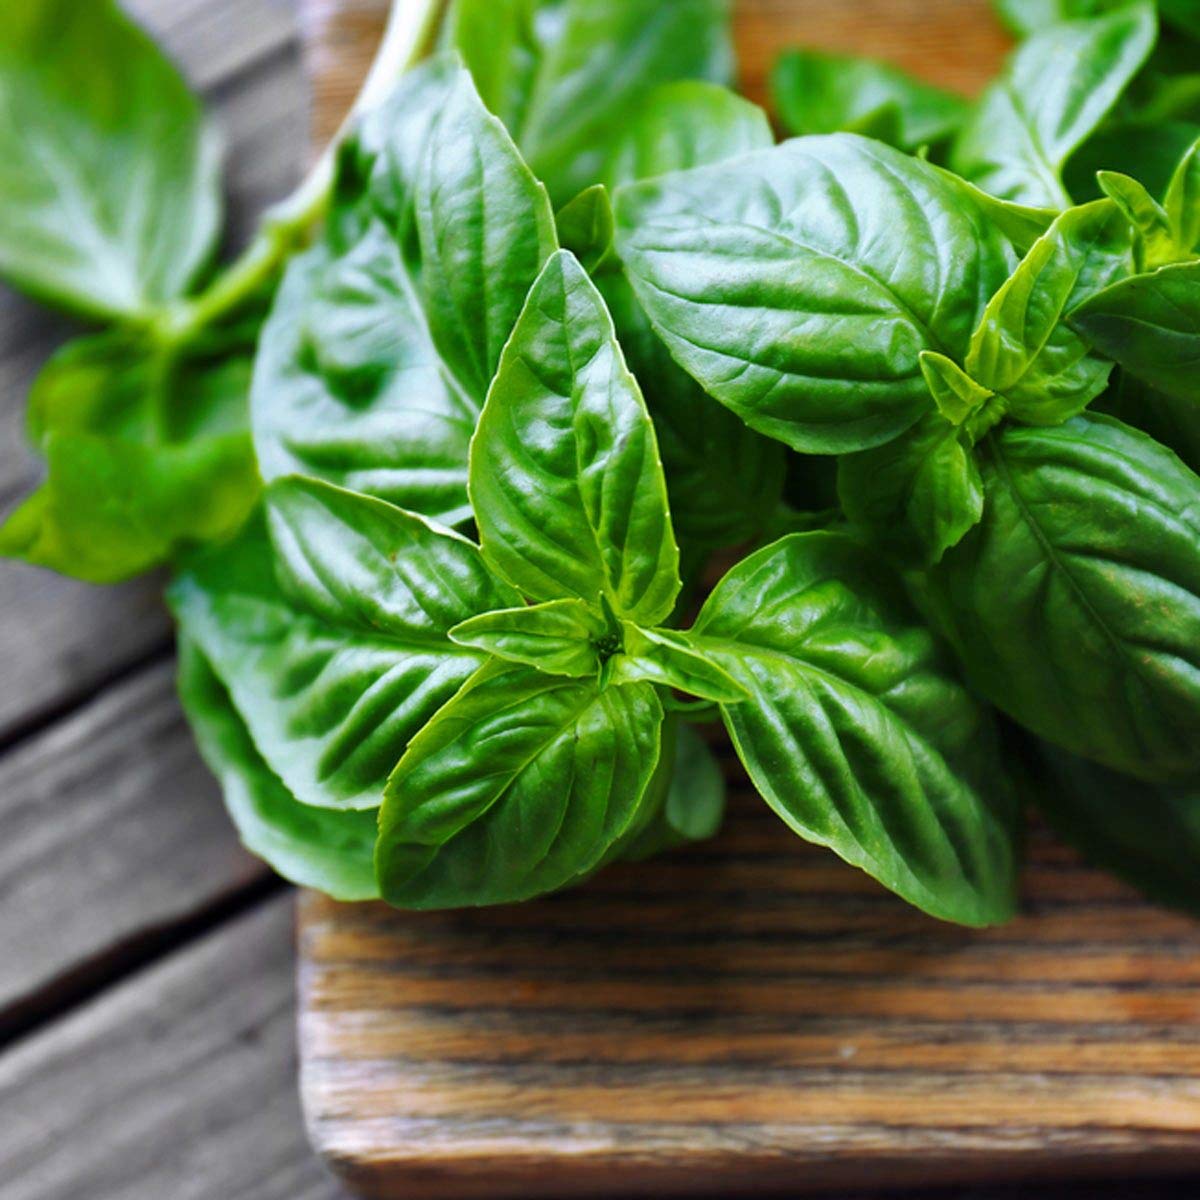 Gaea's Blessing Thai Basil Seeds - Non-GMO - with Easy to Follow Planting Instructions - Open-Pollinated Heirloom High Yield Heirloom 85% Germination Rate